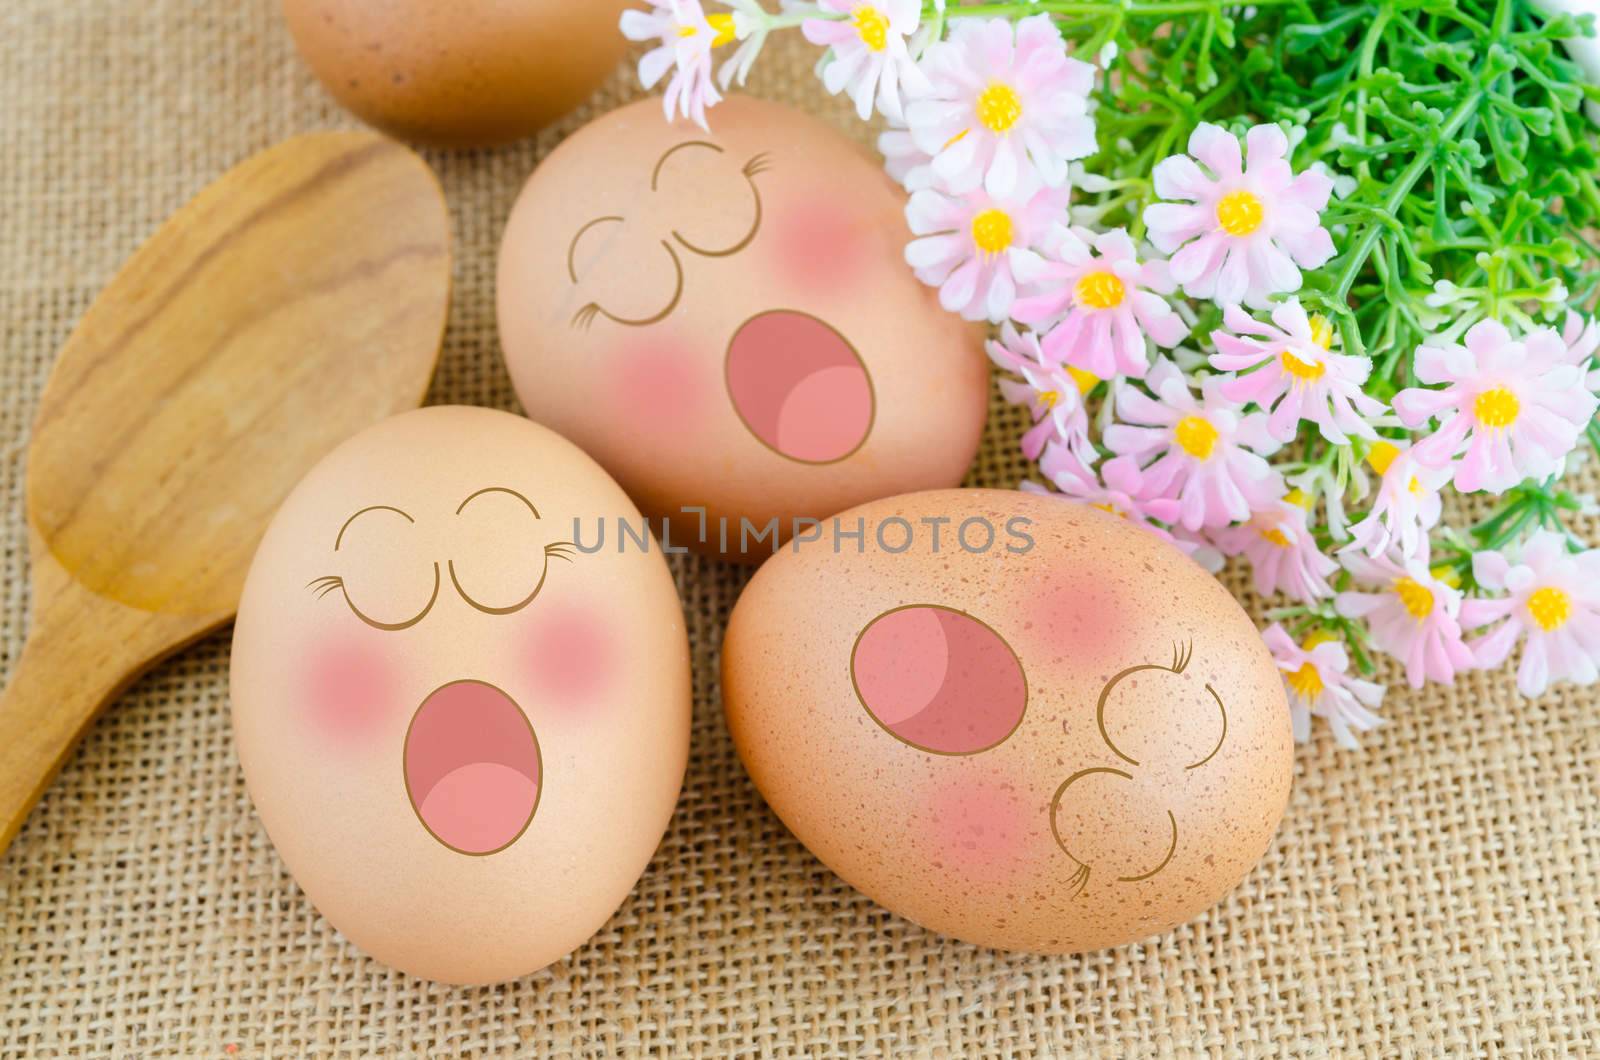 Eggs sleep in Expression Face by Gamjai